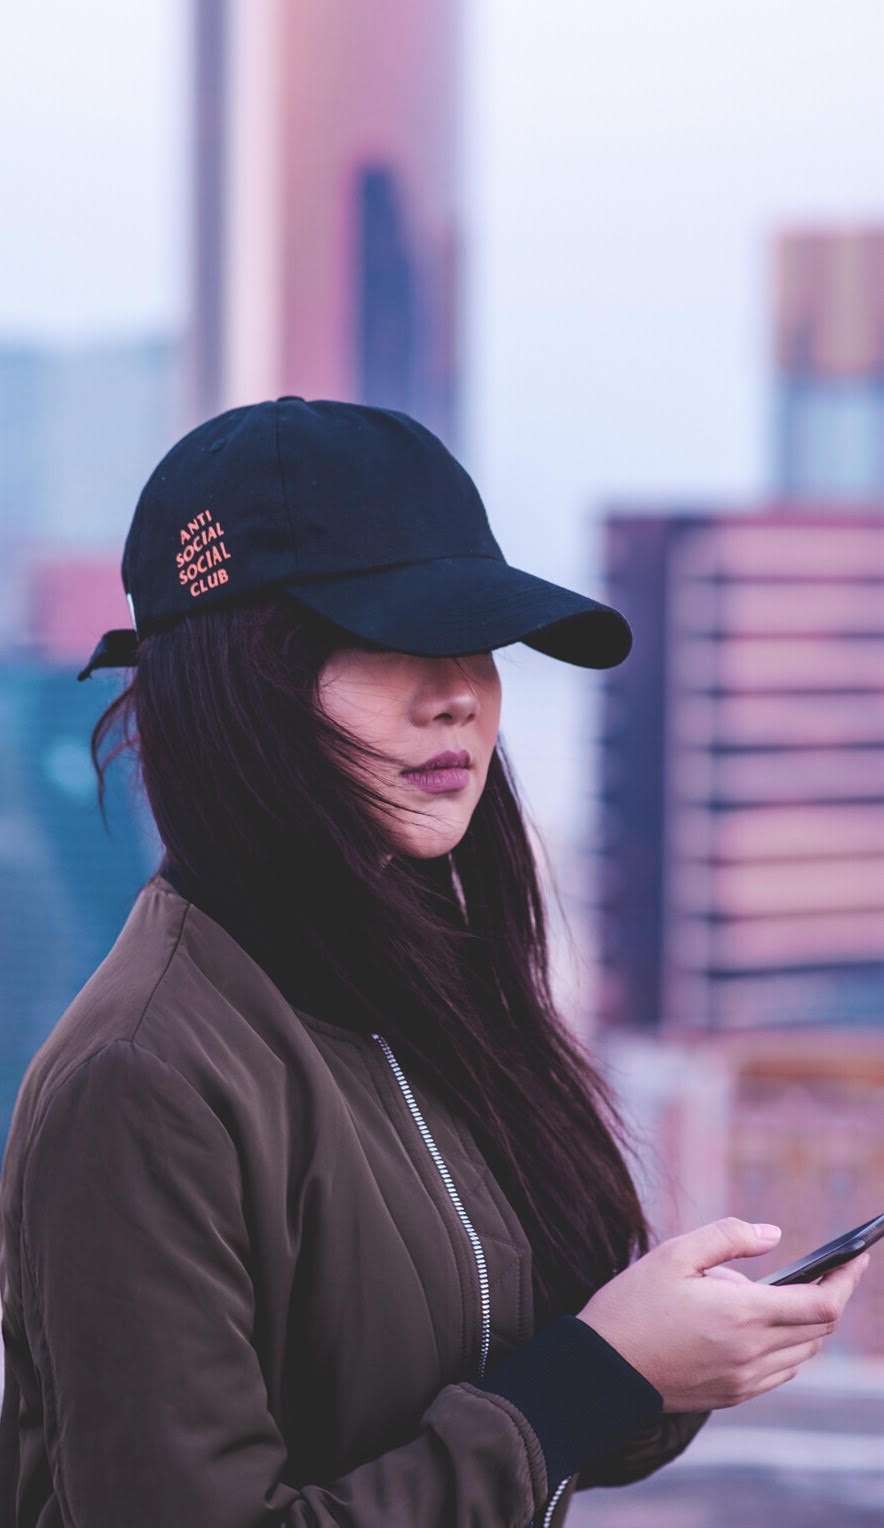 A young woman outside in Macau wearing a dark baseball cap, brown jacket, and holding a mobile phone.